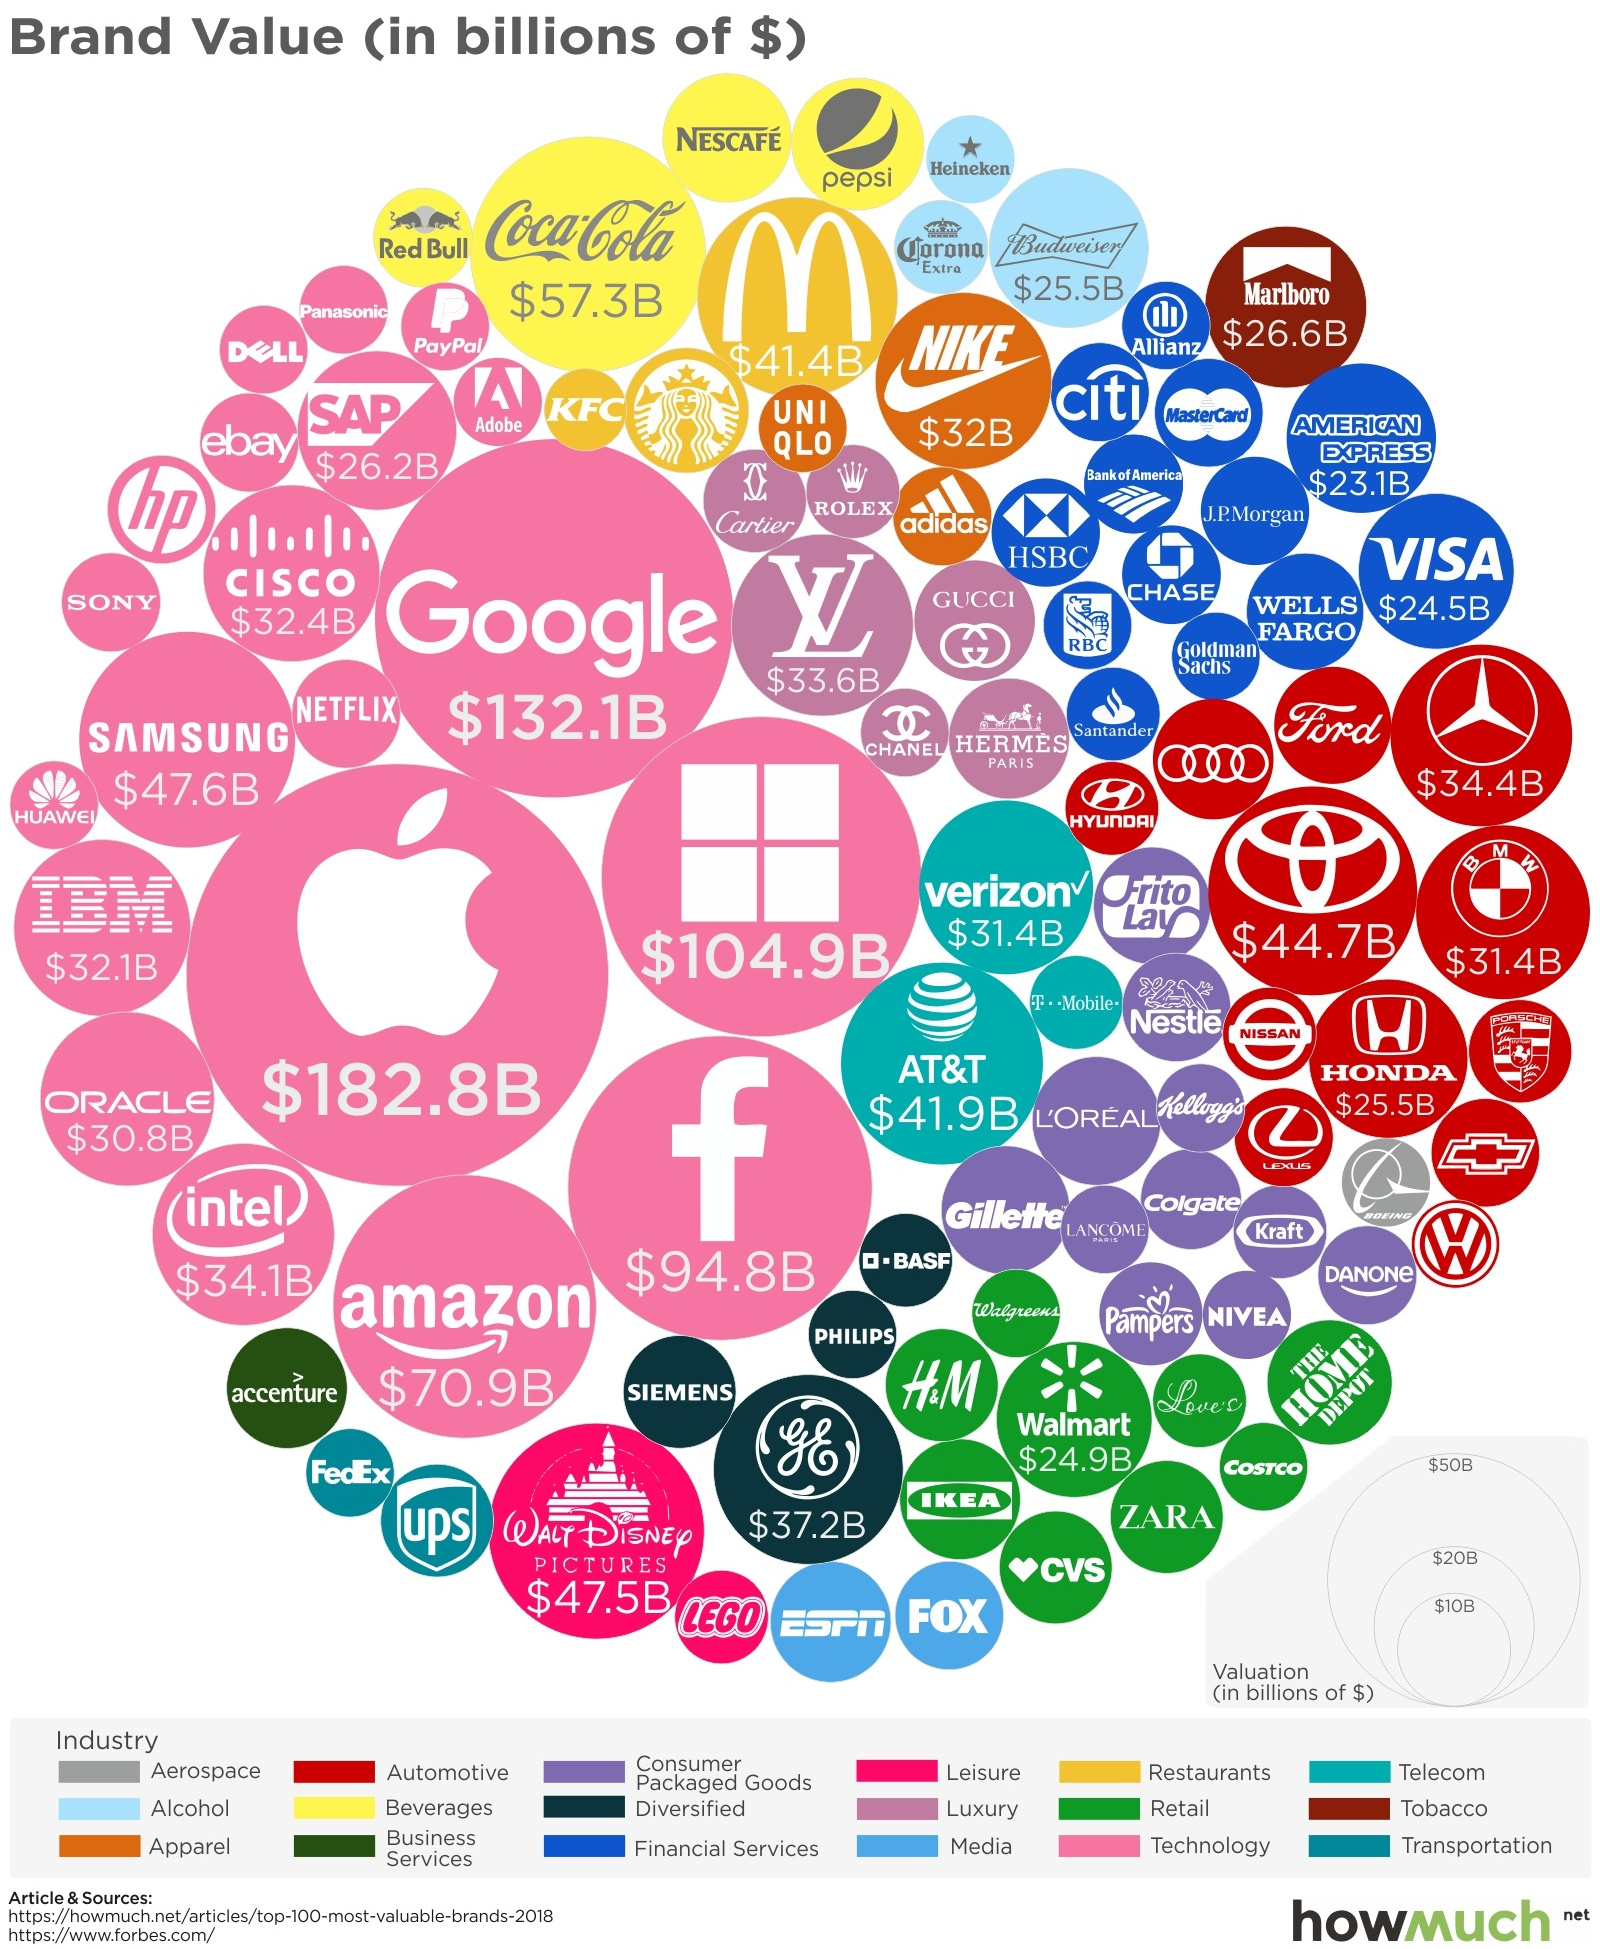 The World's 100 Most Valuable Brands in 2018